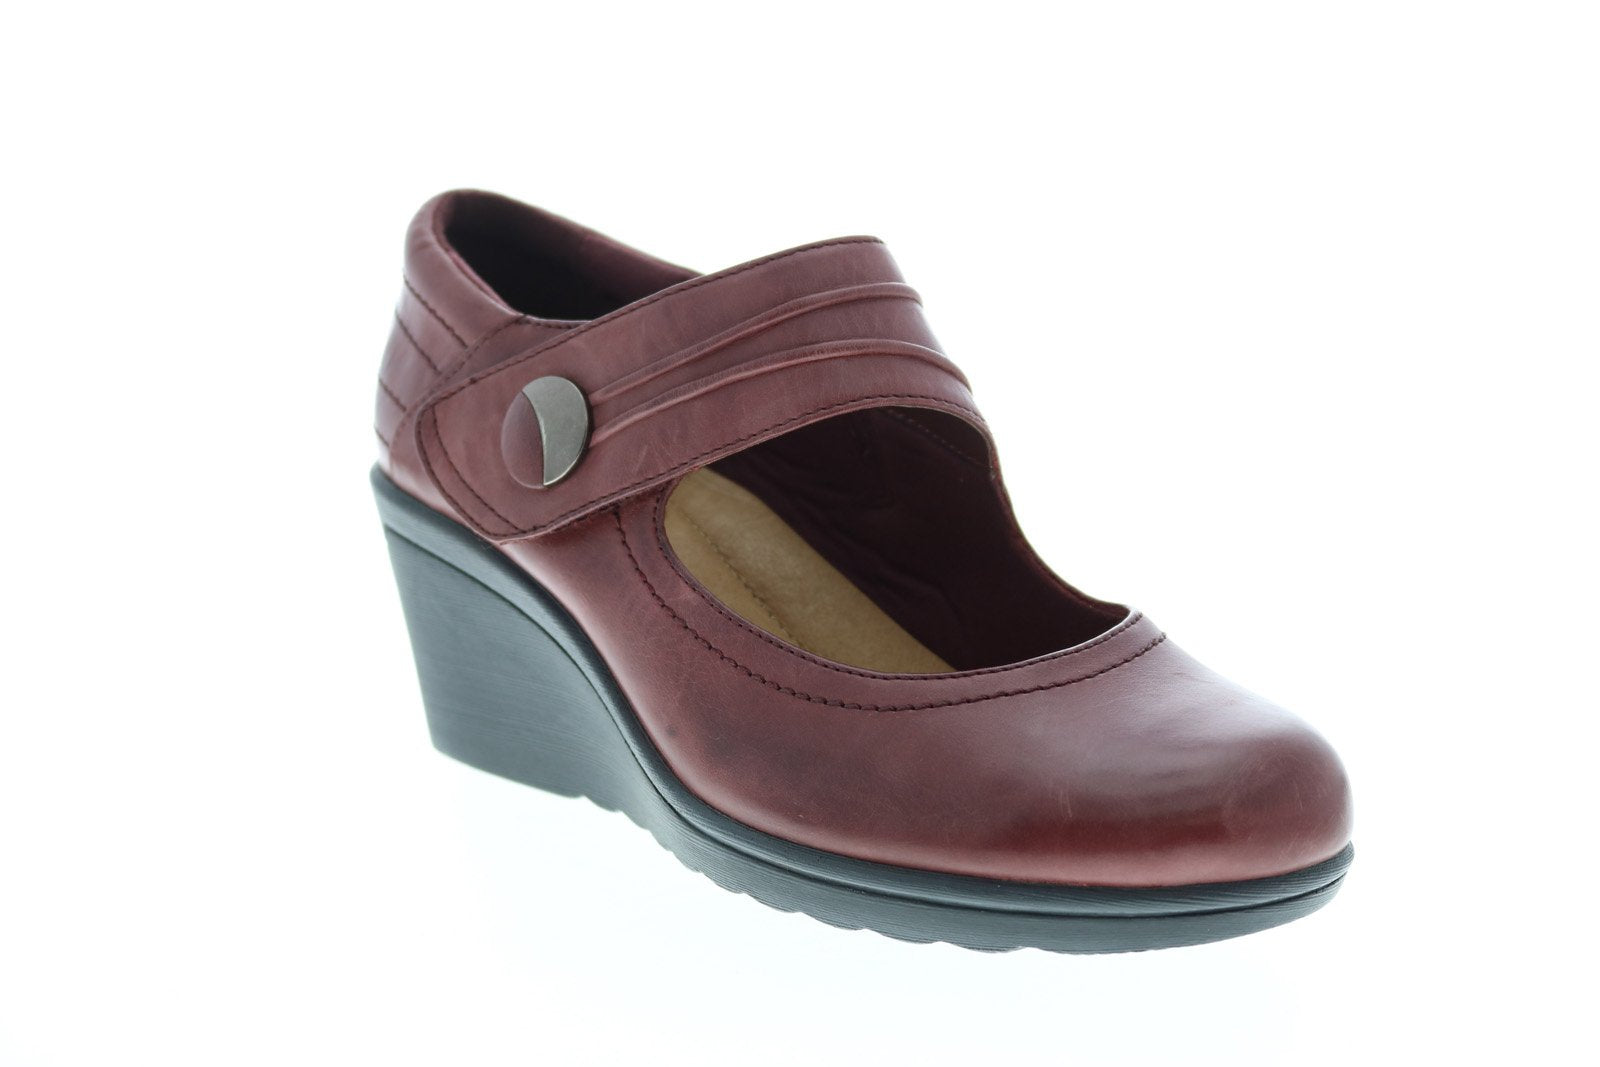 Earth Heron Leather Womens Burgundy Leather Strap Wedges Heels Shoes ...